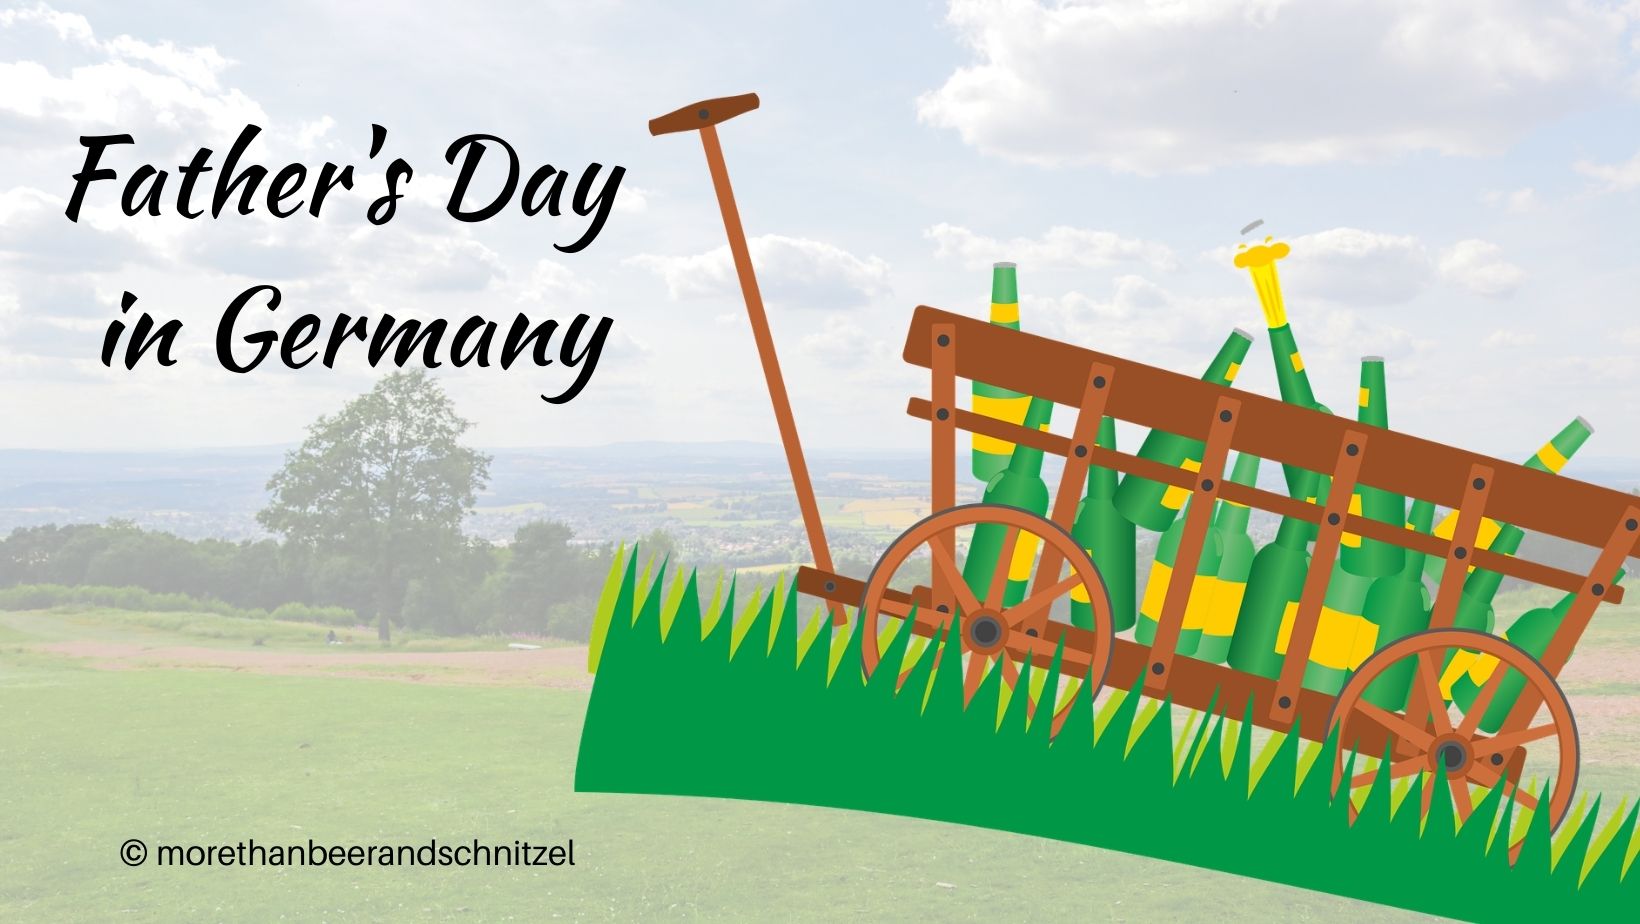 Father's Day in Germany More than Beer and Schnitzel